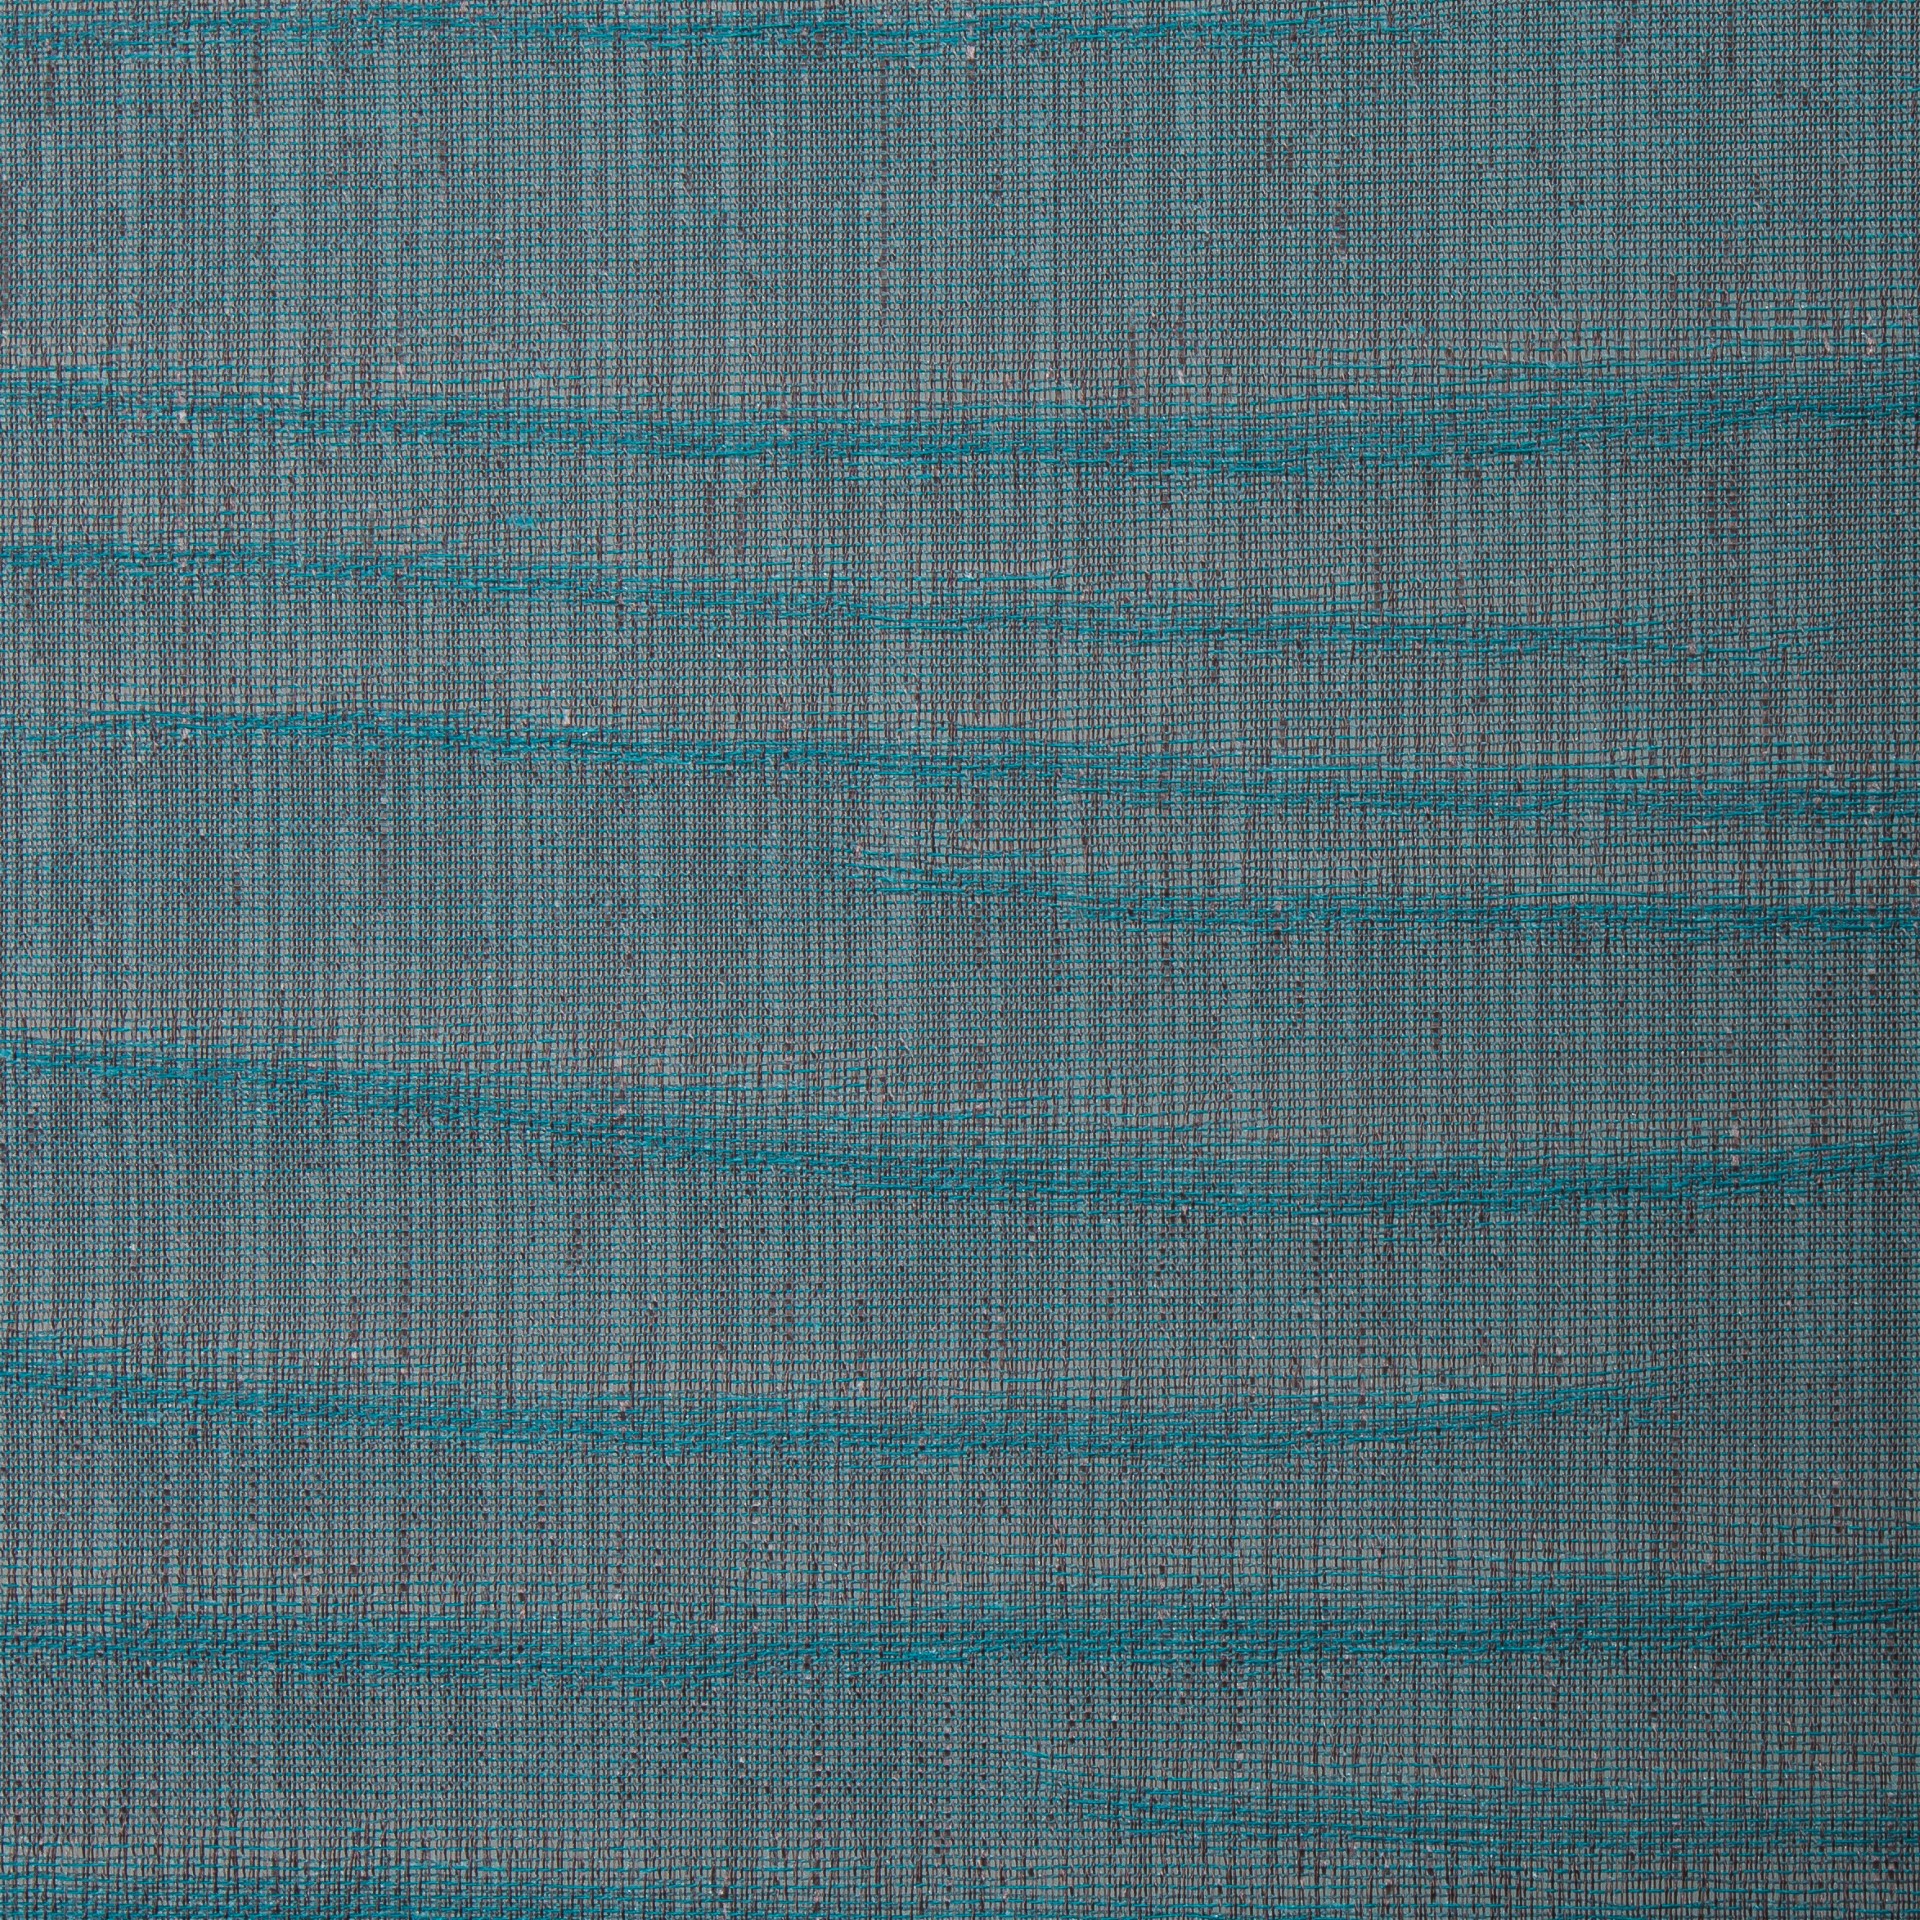 Masai Translucent Roller Blind Turquoise Fabric Detail